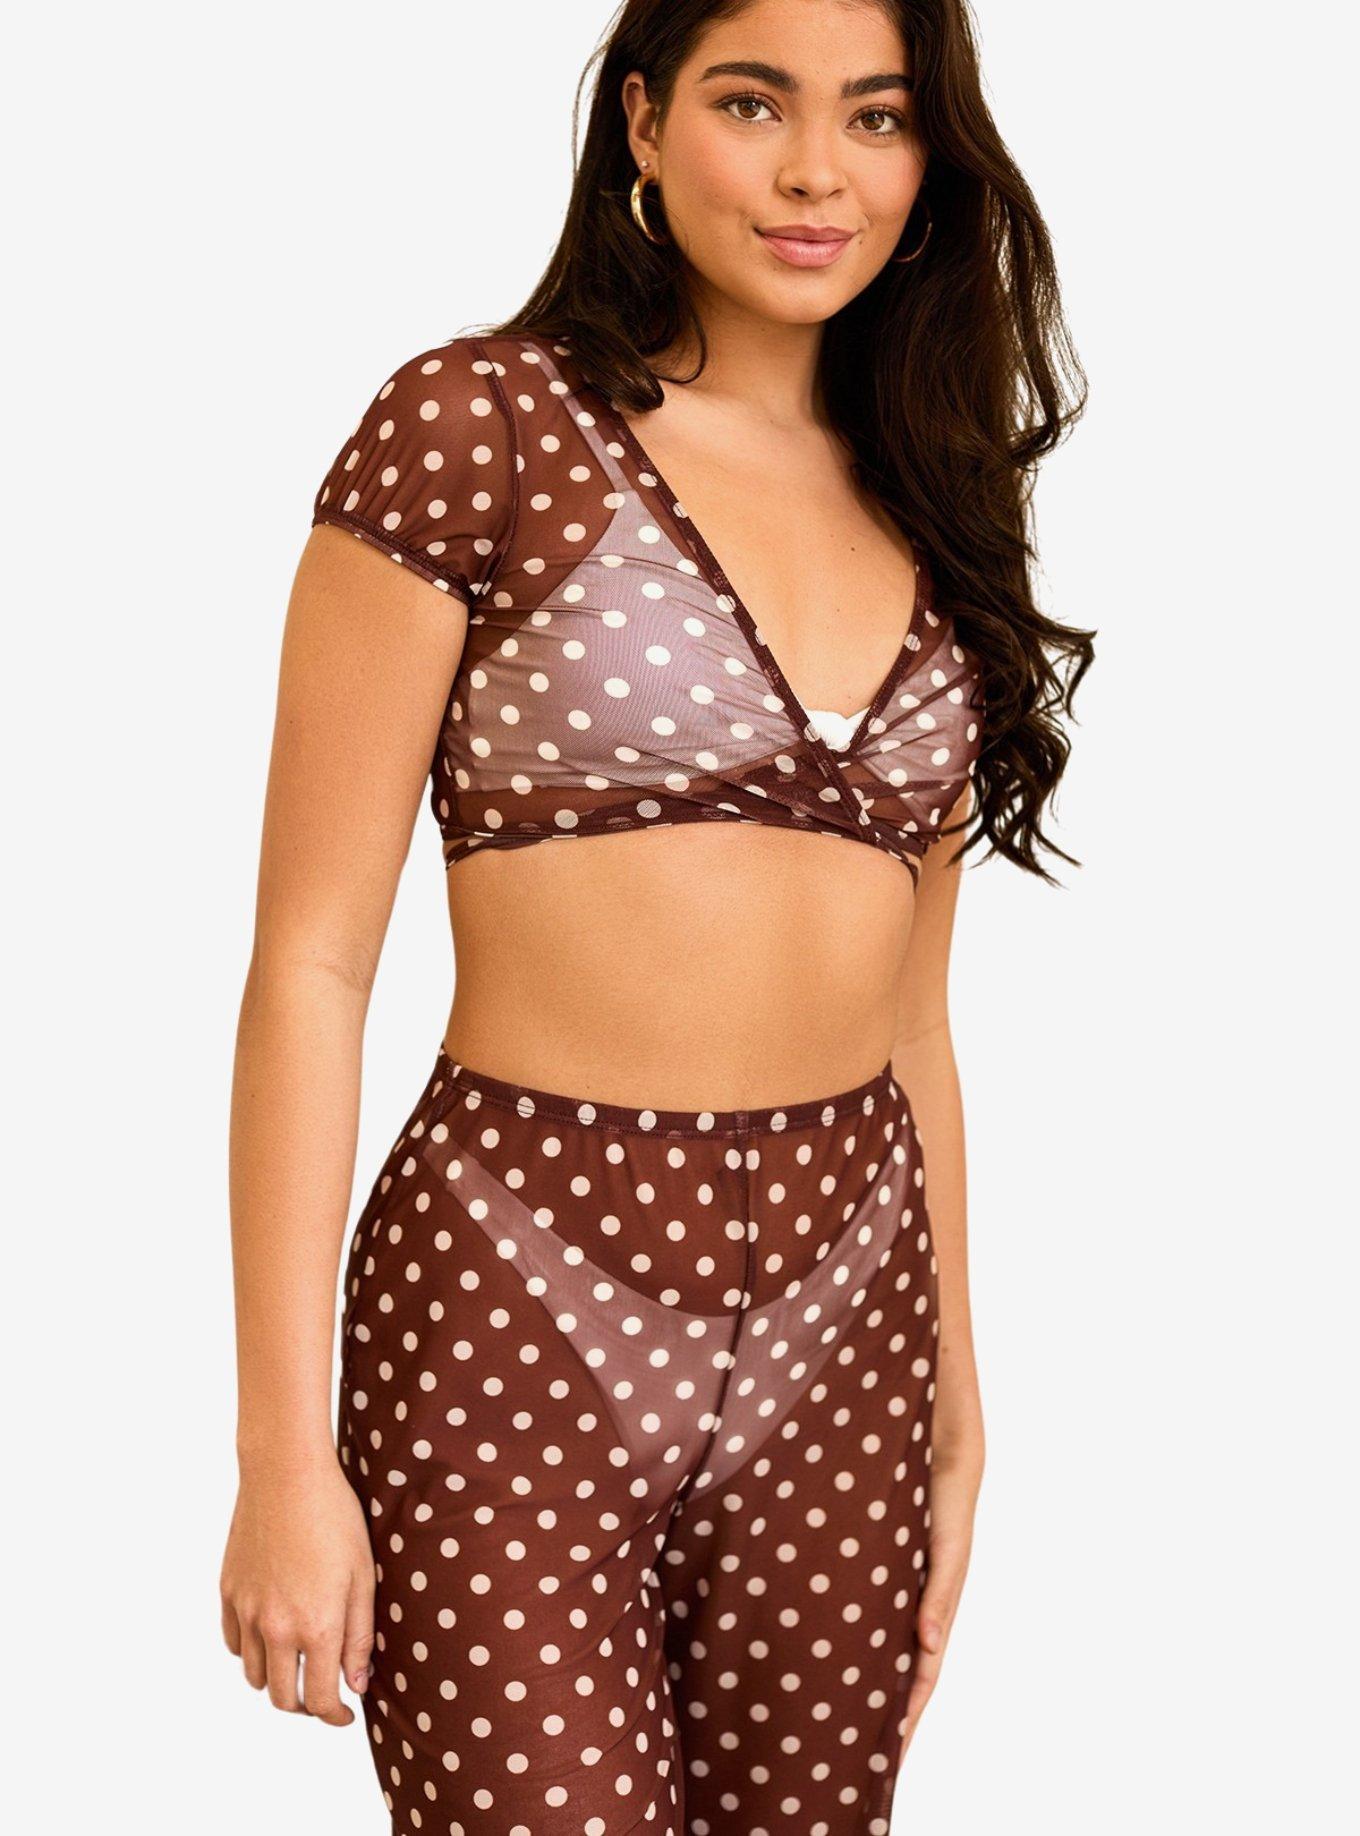 Dippin' Daisy's That Girl Swim Cover-Up Pants Dotted Brown, BROWN, alternate